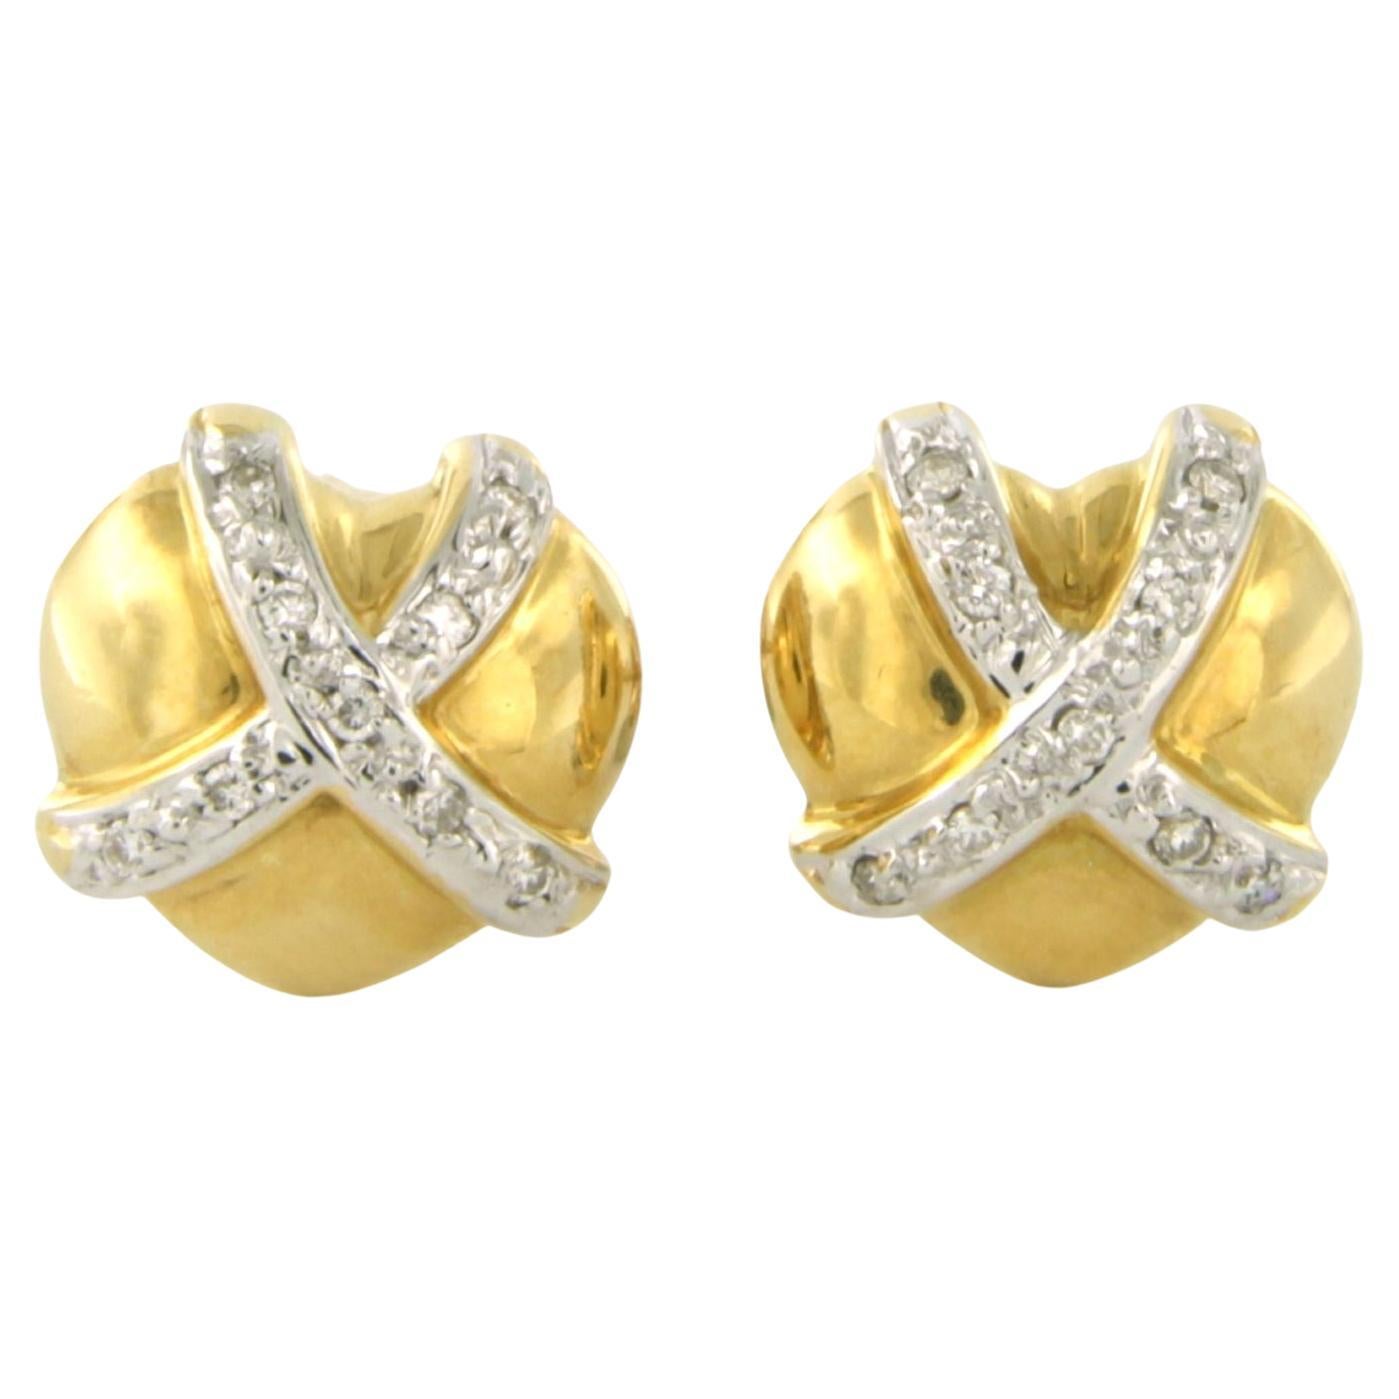 Earrings studs set with diamonds 18k bicolour gold For Sale